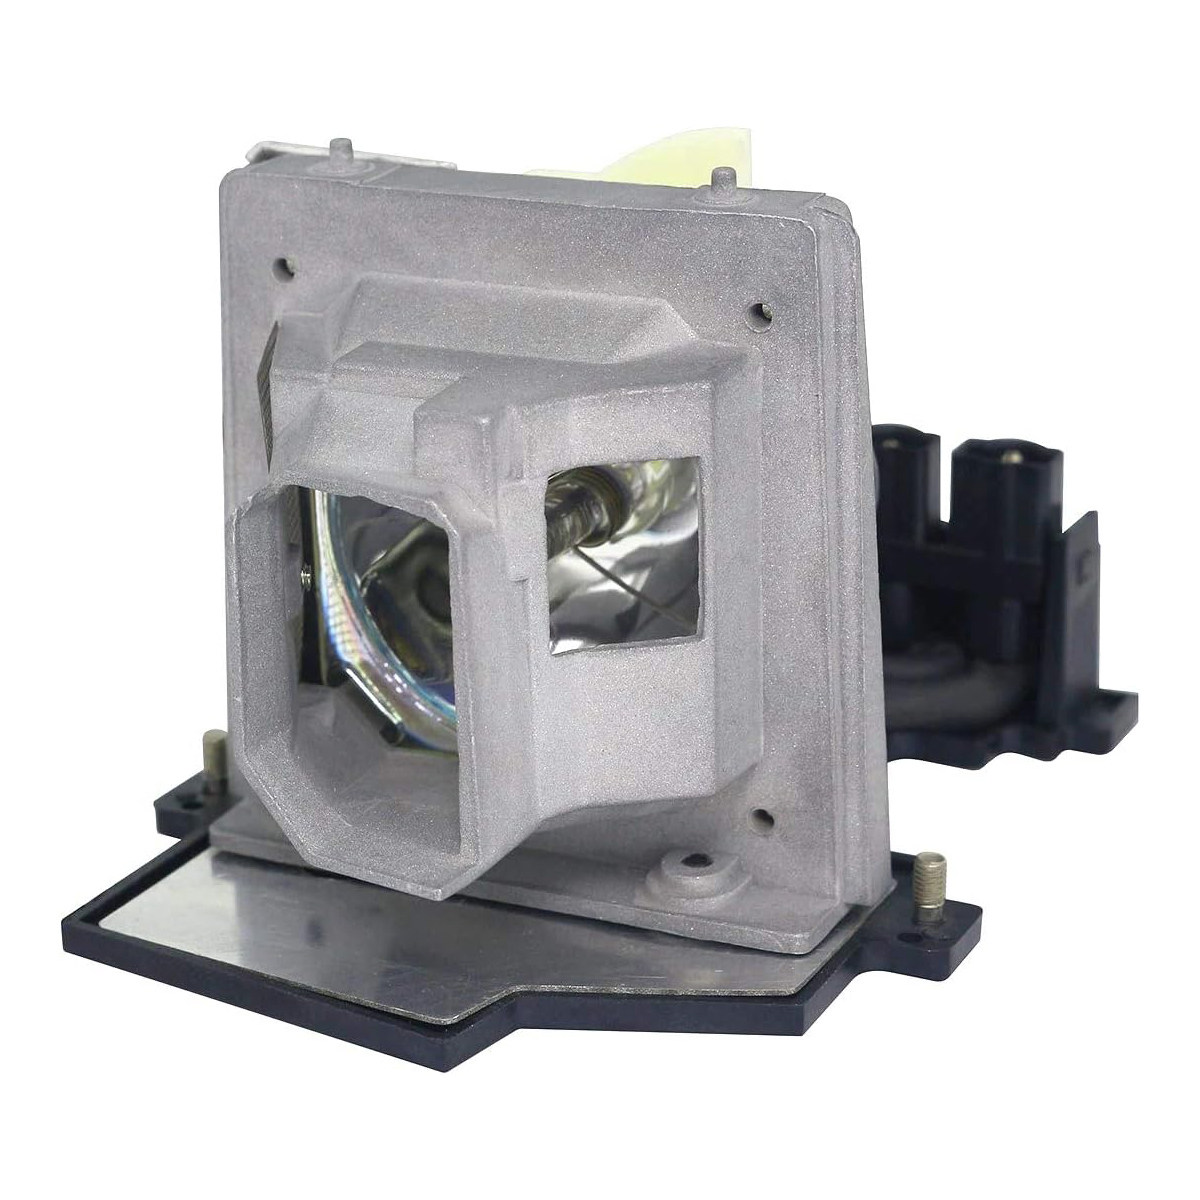 Replacement Projector lamp EC.J1202.001 For ACER PD113P PD123 PH110